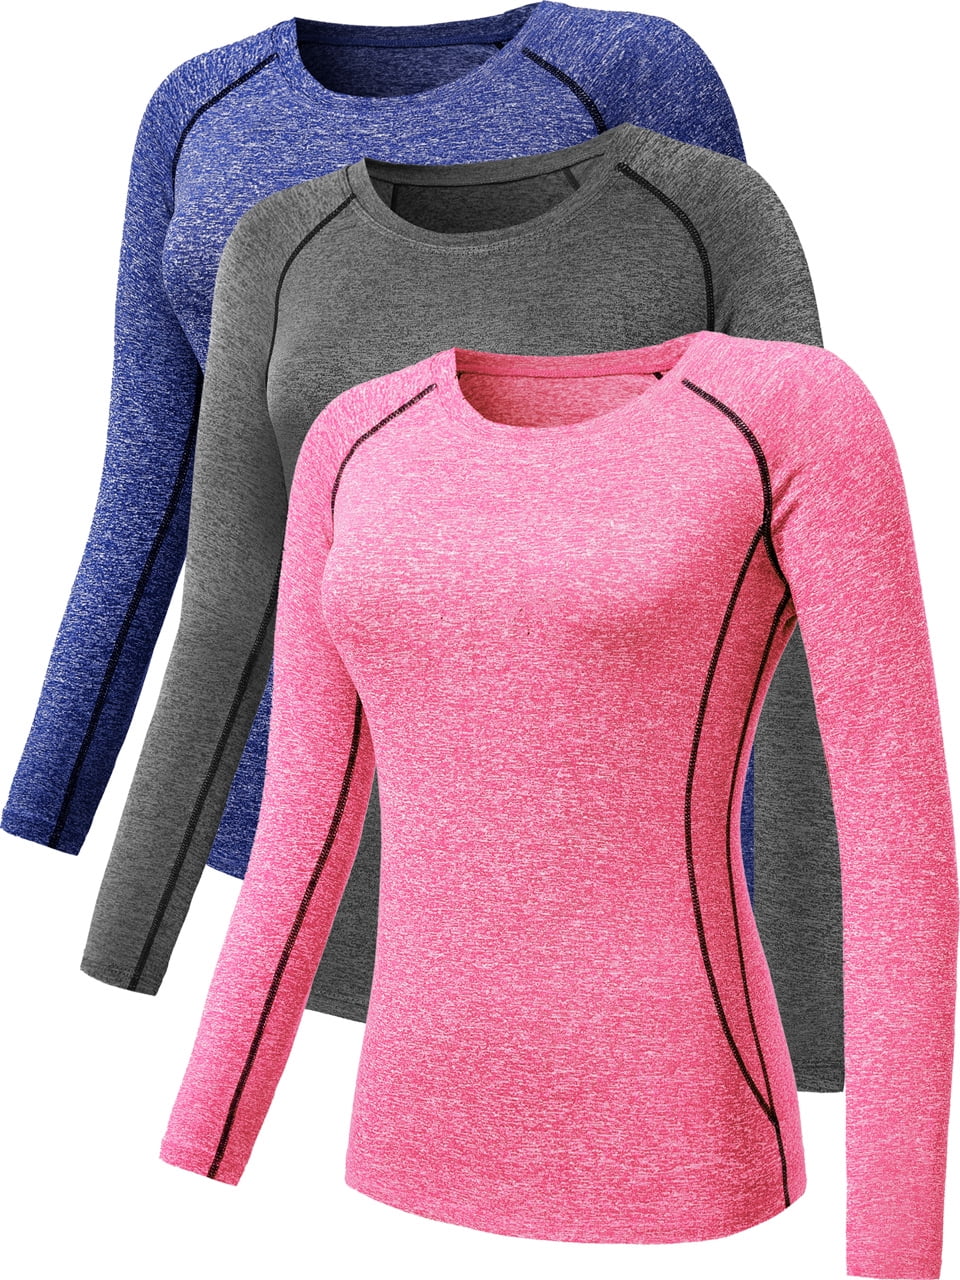 NELEUS Womens Athletic Compression Long Sleeve Yoga T Shirt Dry Fit 3  Pack,Gray+Blue+Pink,US Size S